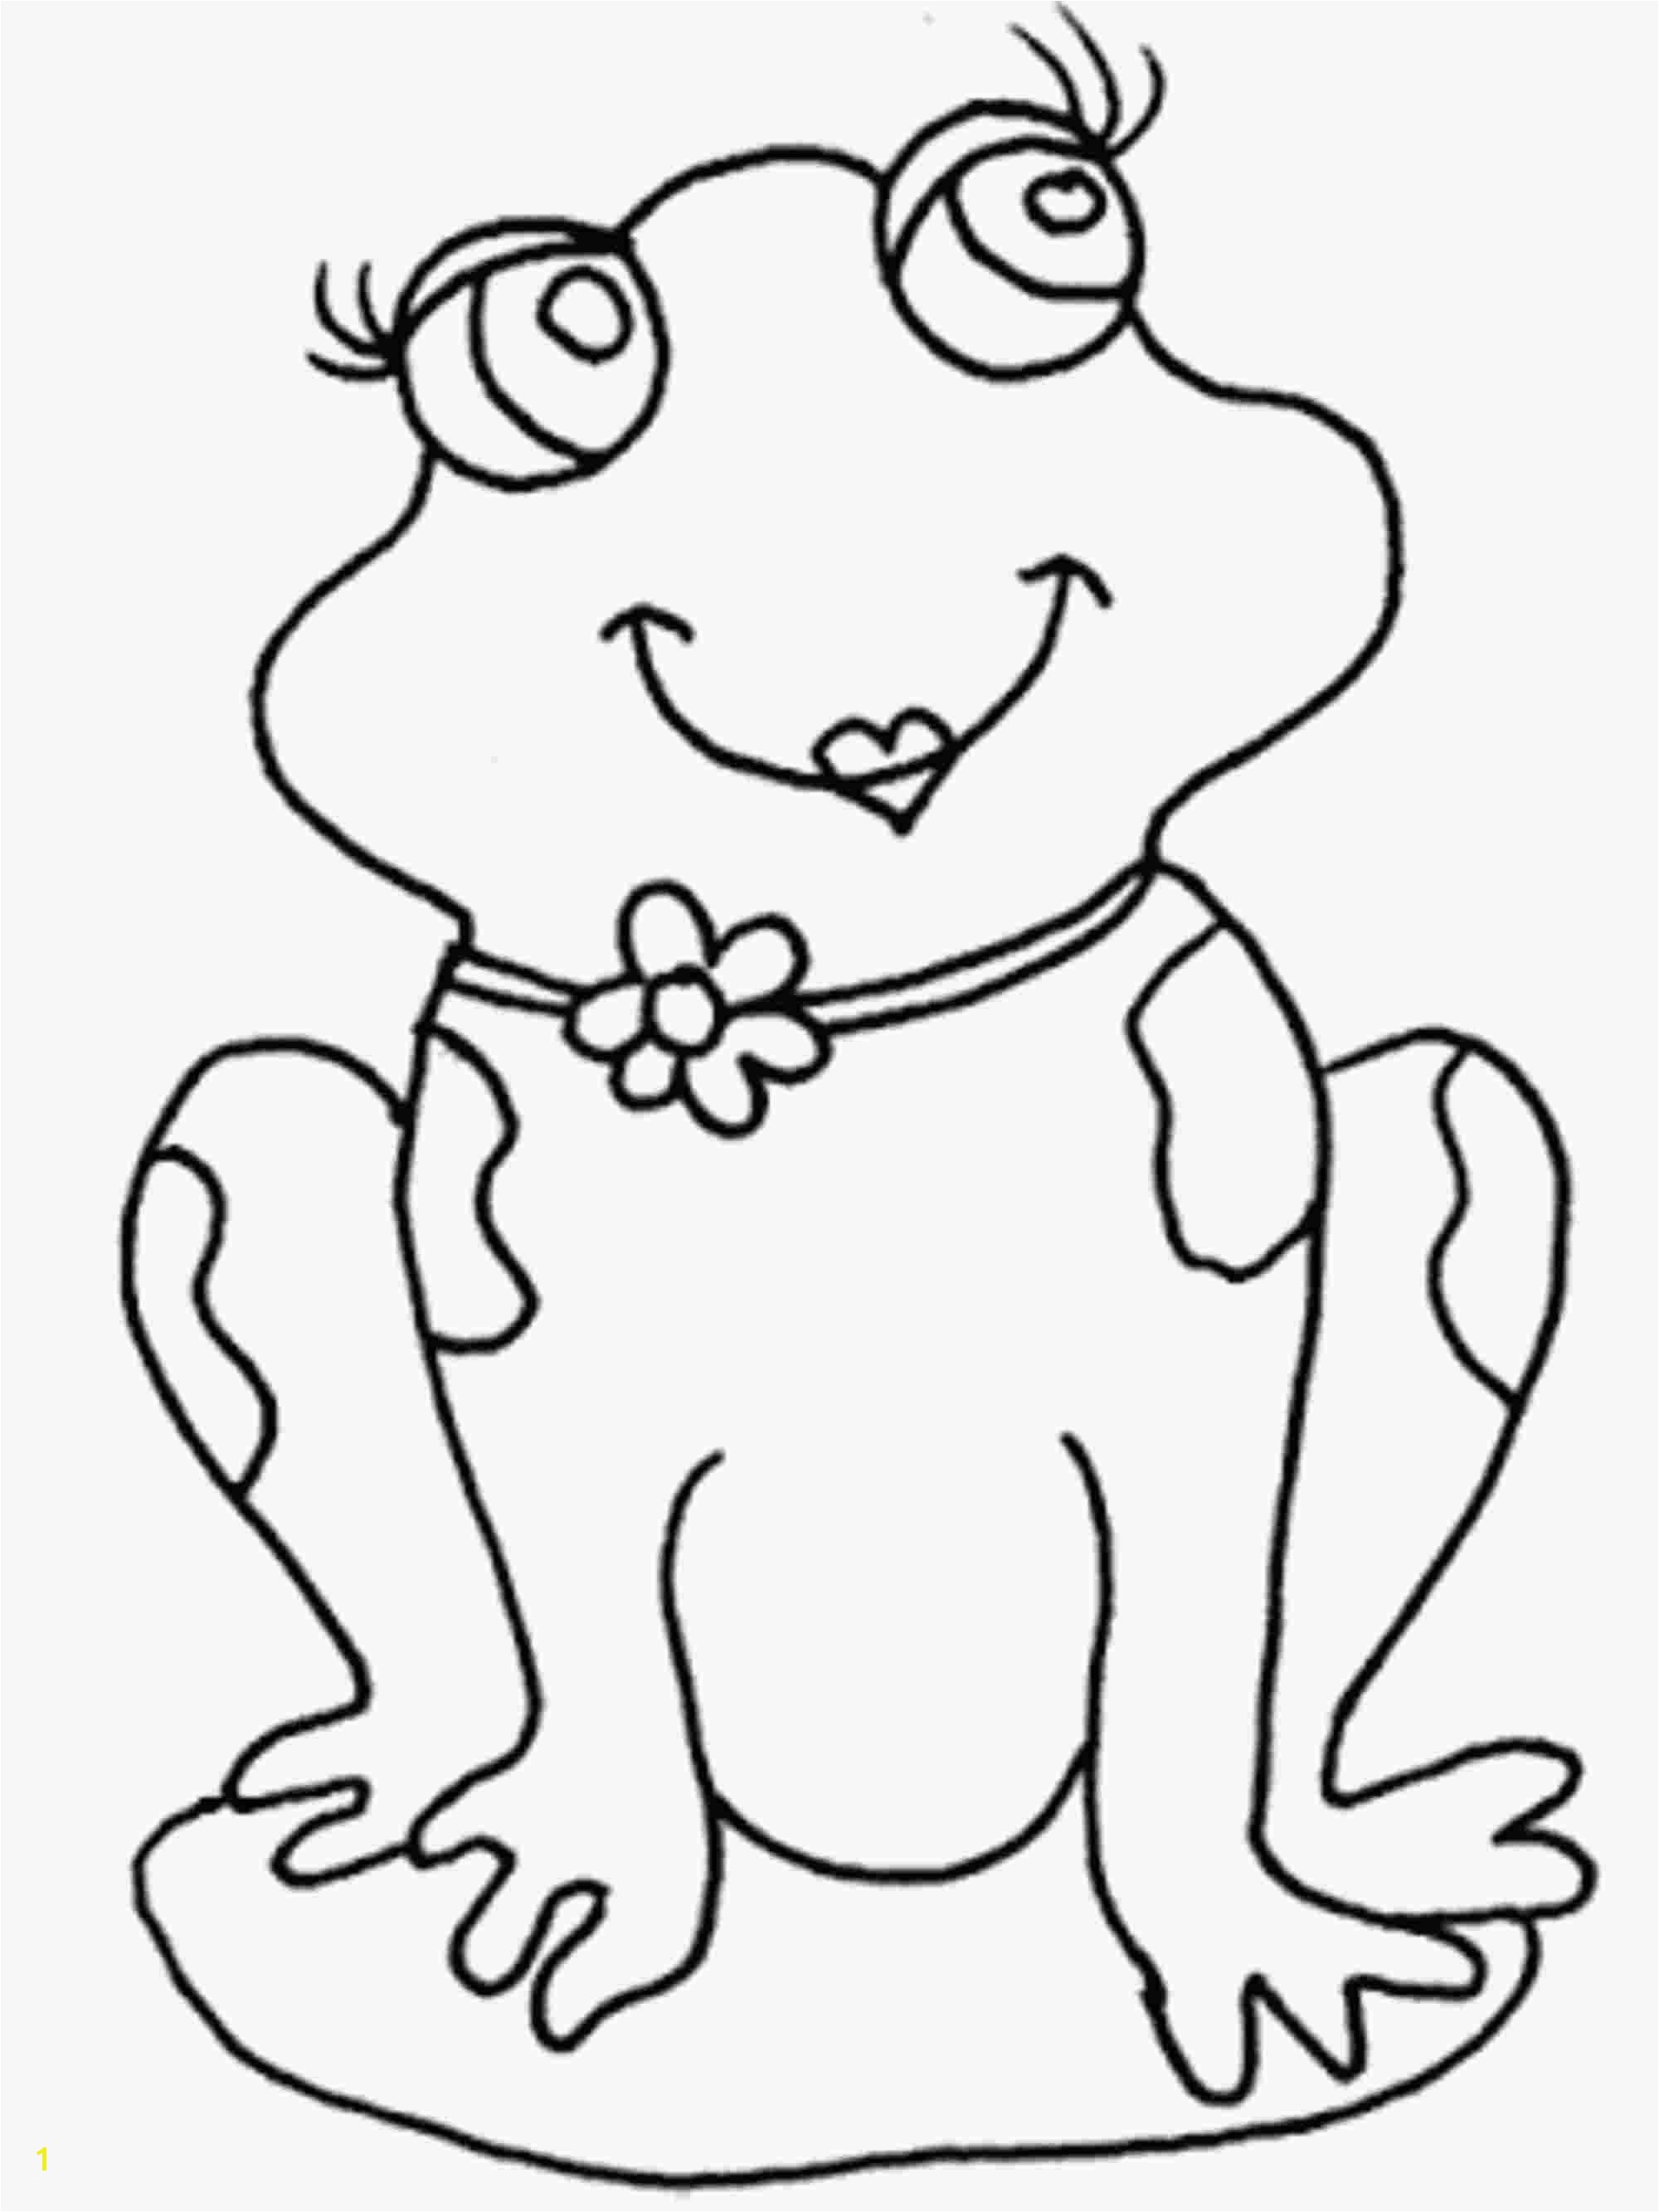 Frog Coloring Pages Awesome Free Frog Coloring Pages Elegant Frog Colouring 0d Free Coloring Ruva